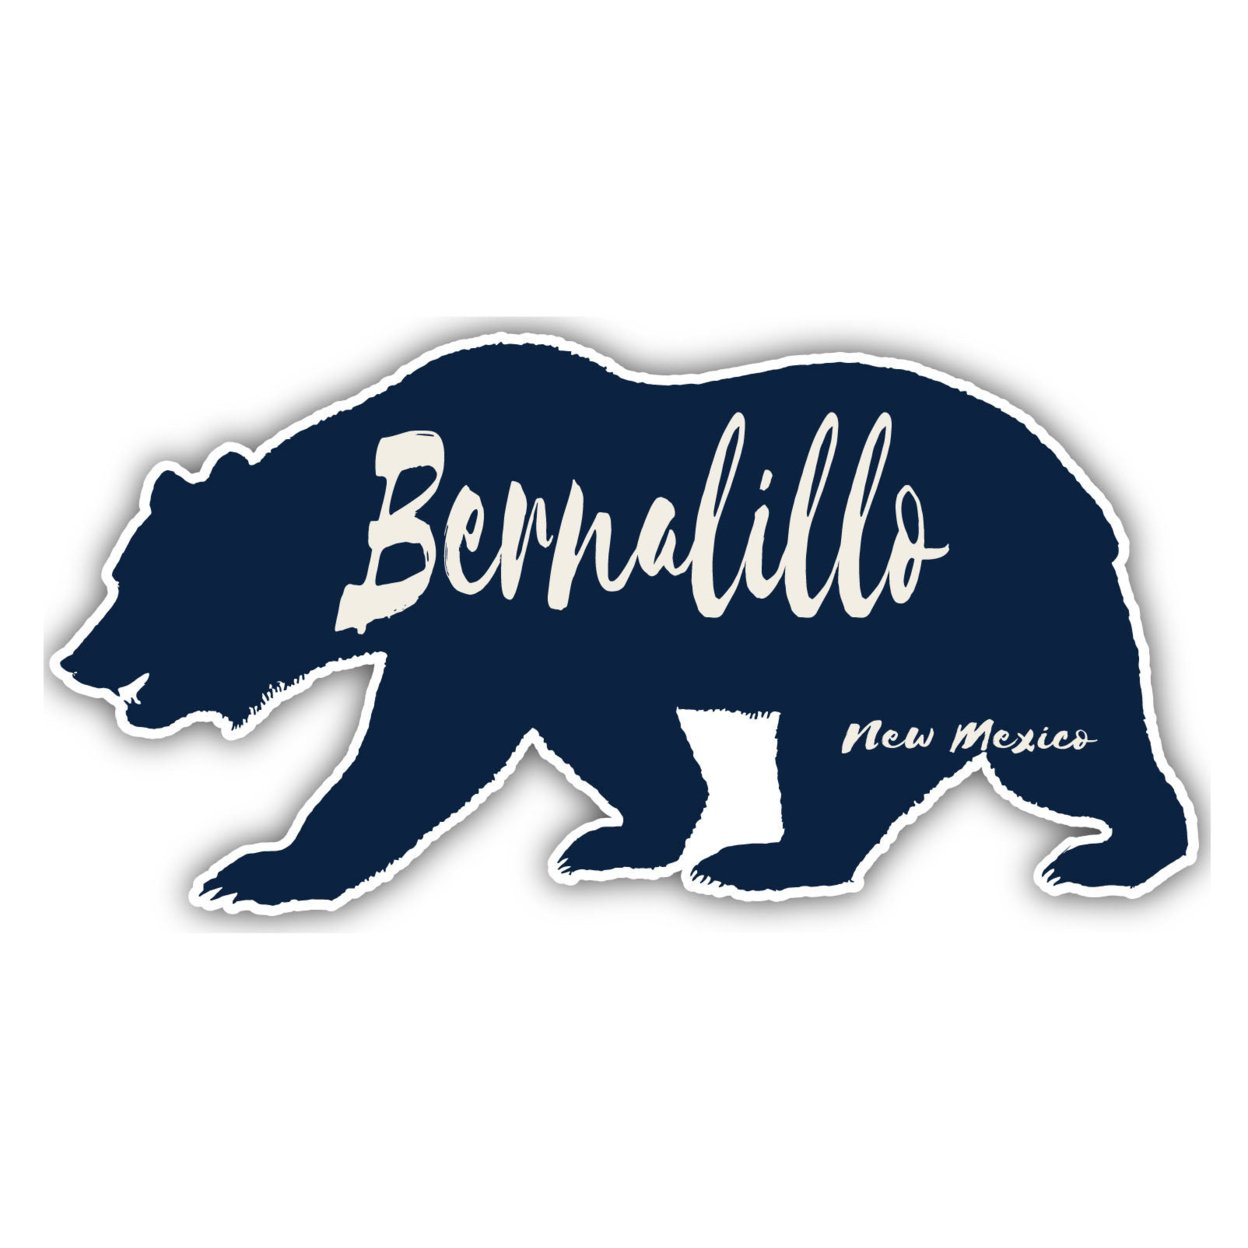 Bernalillo New Mexico Souvenir Decorative Stickers (Choose Theme And Size) - 4-Pack, 2-Inch, Tent